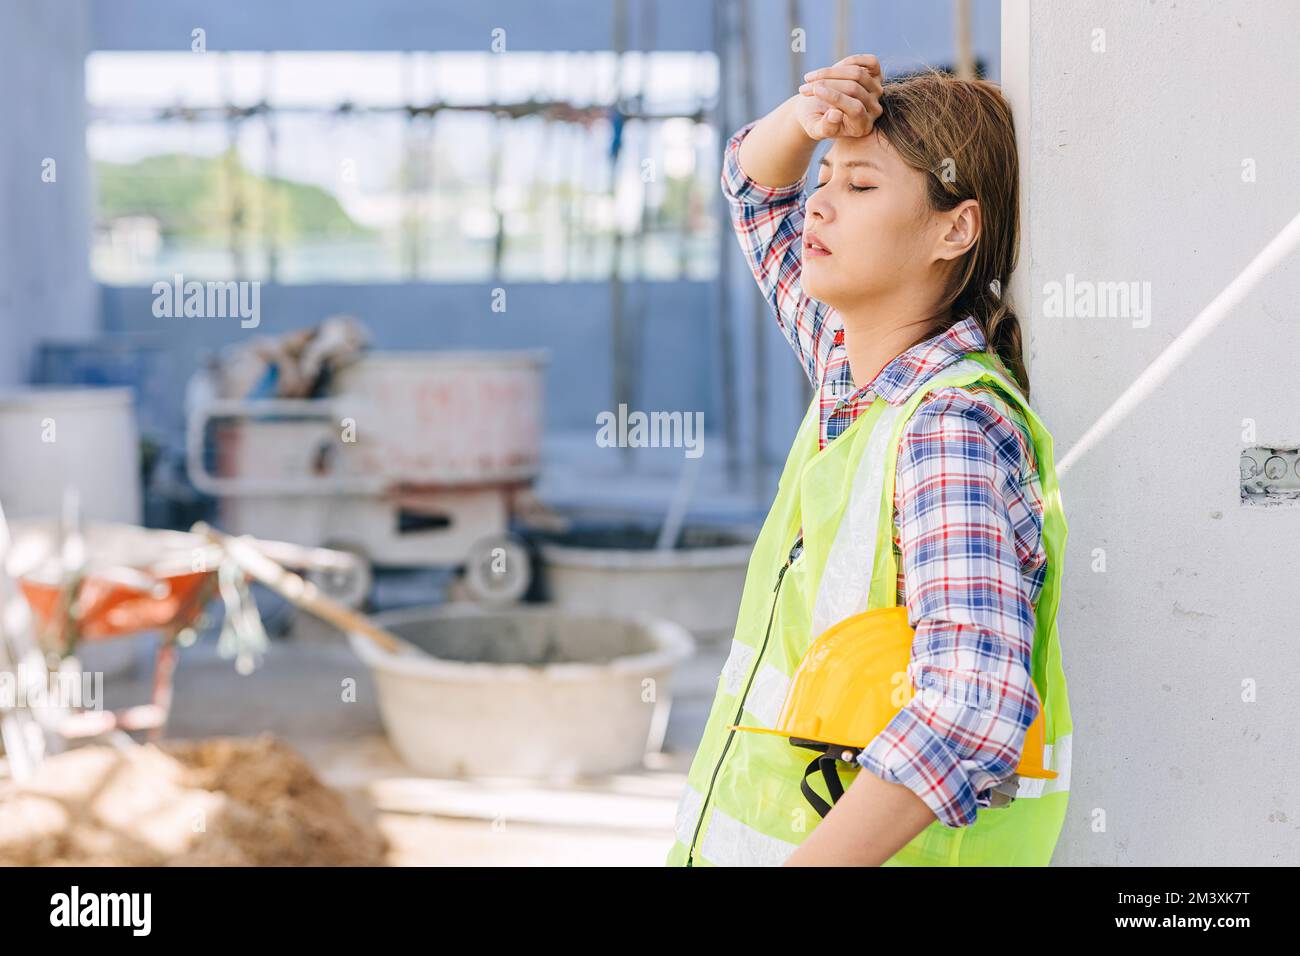 woman worker tired from work hard overwork fatigue be sick at construction site Stock Photo